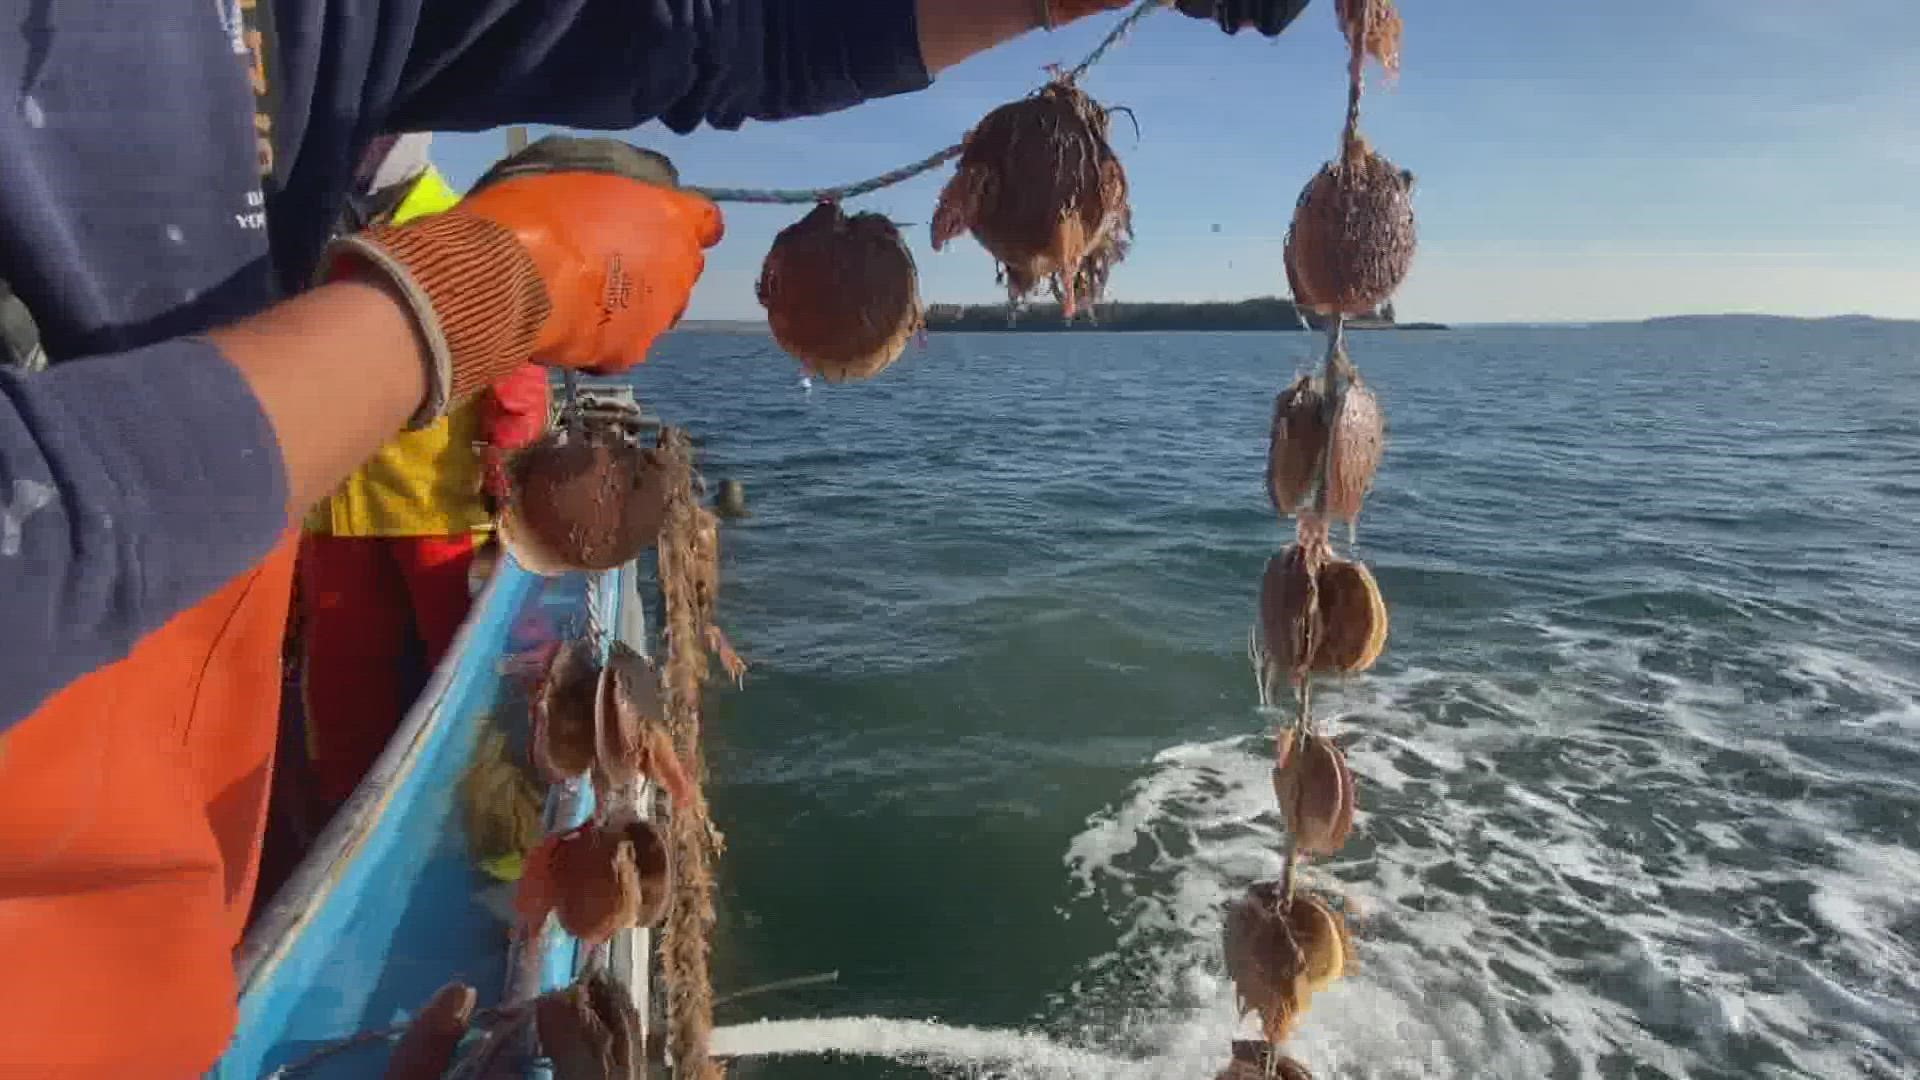 Scallops can clean seawater around them. But combatting effects from climate change like storm surge and warming waters pose a potential threat.